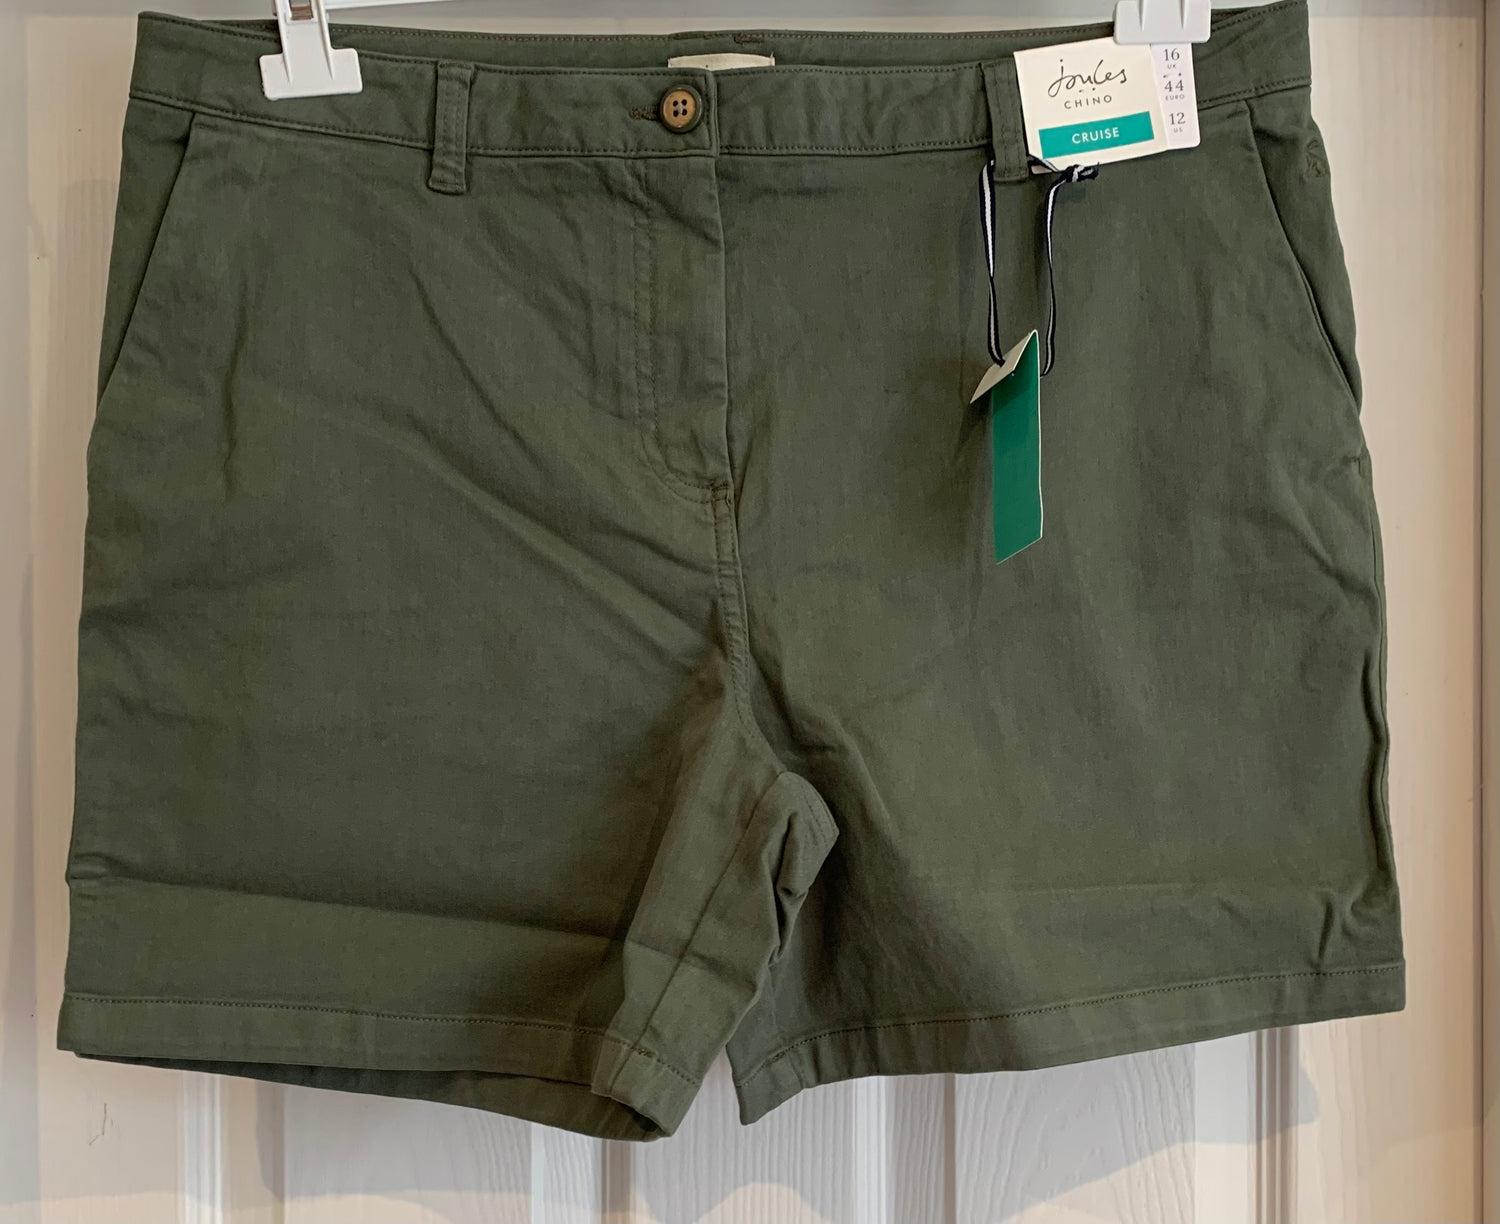 EX Joules Cruise Mid Thigh Length Chino Shorts in Seaweed Green 6-18 RRP £39.95